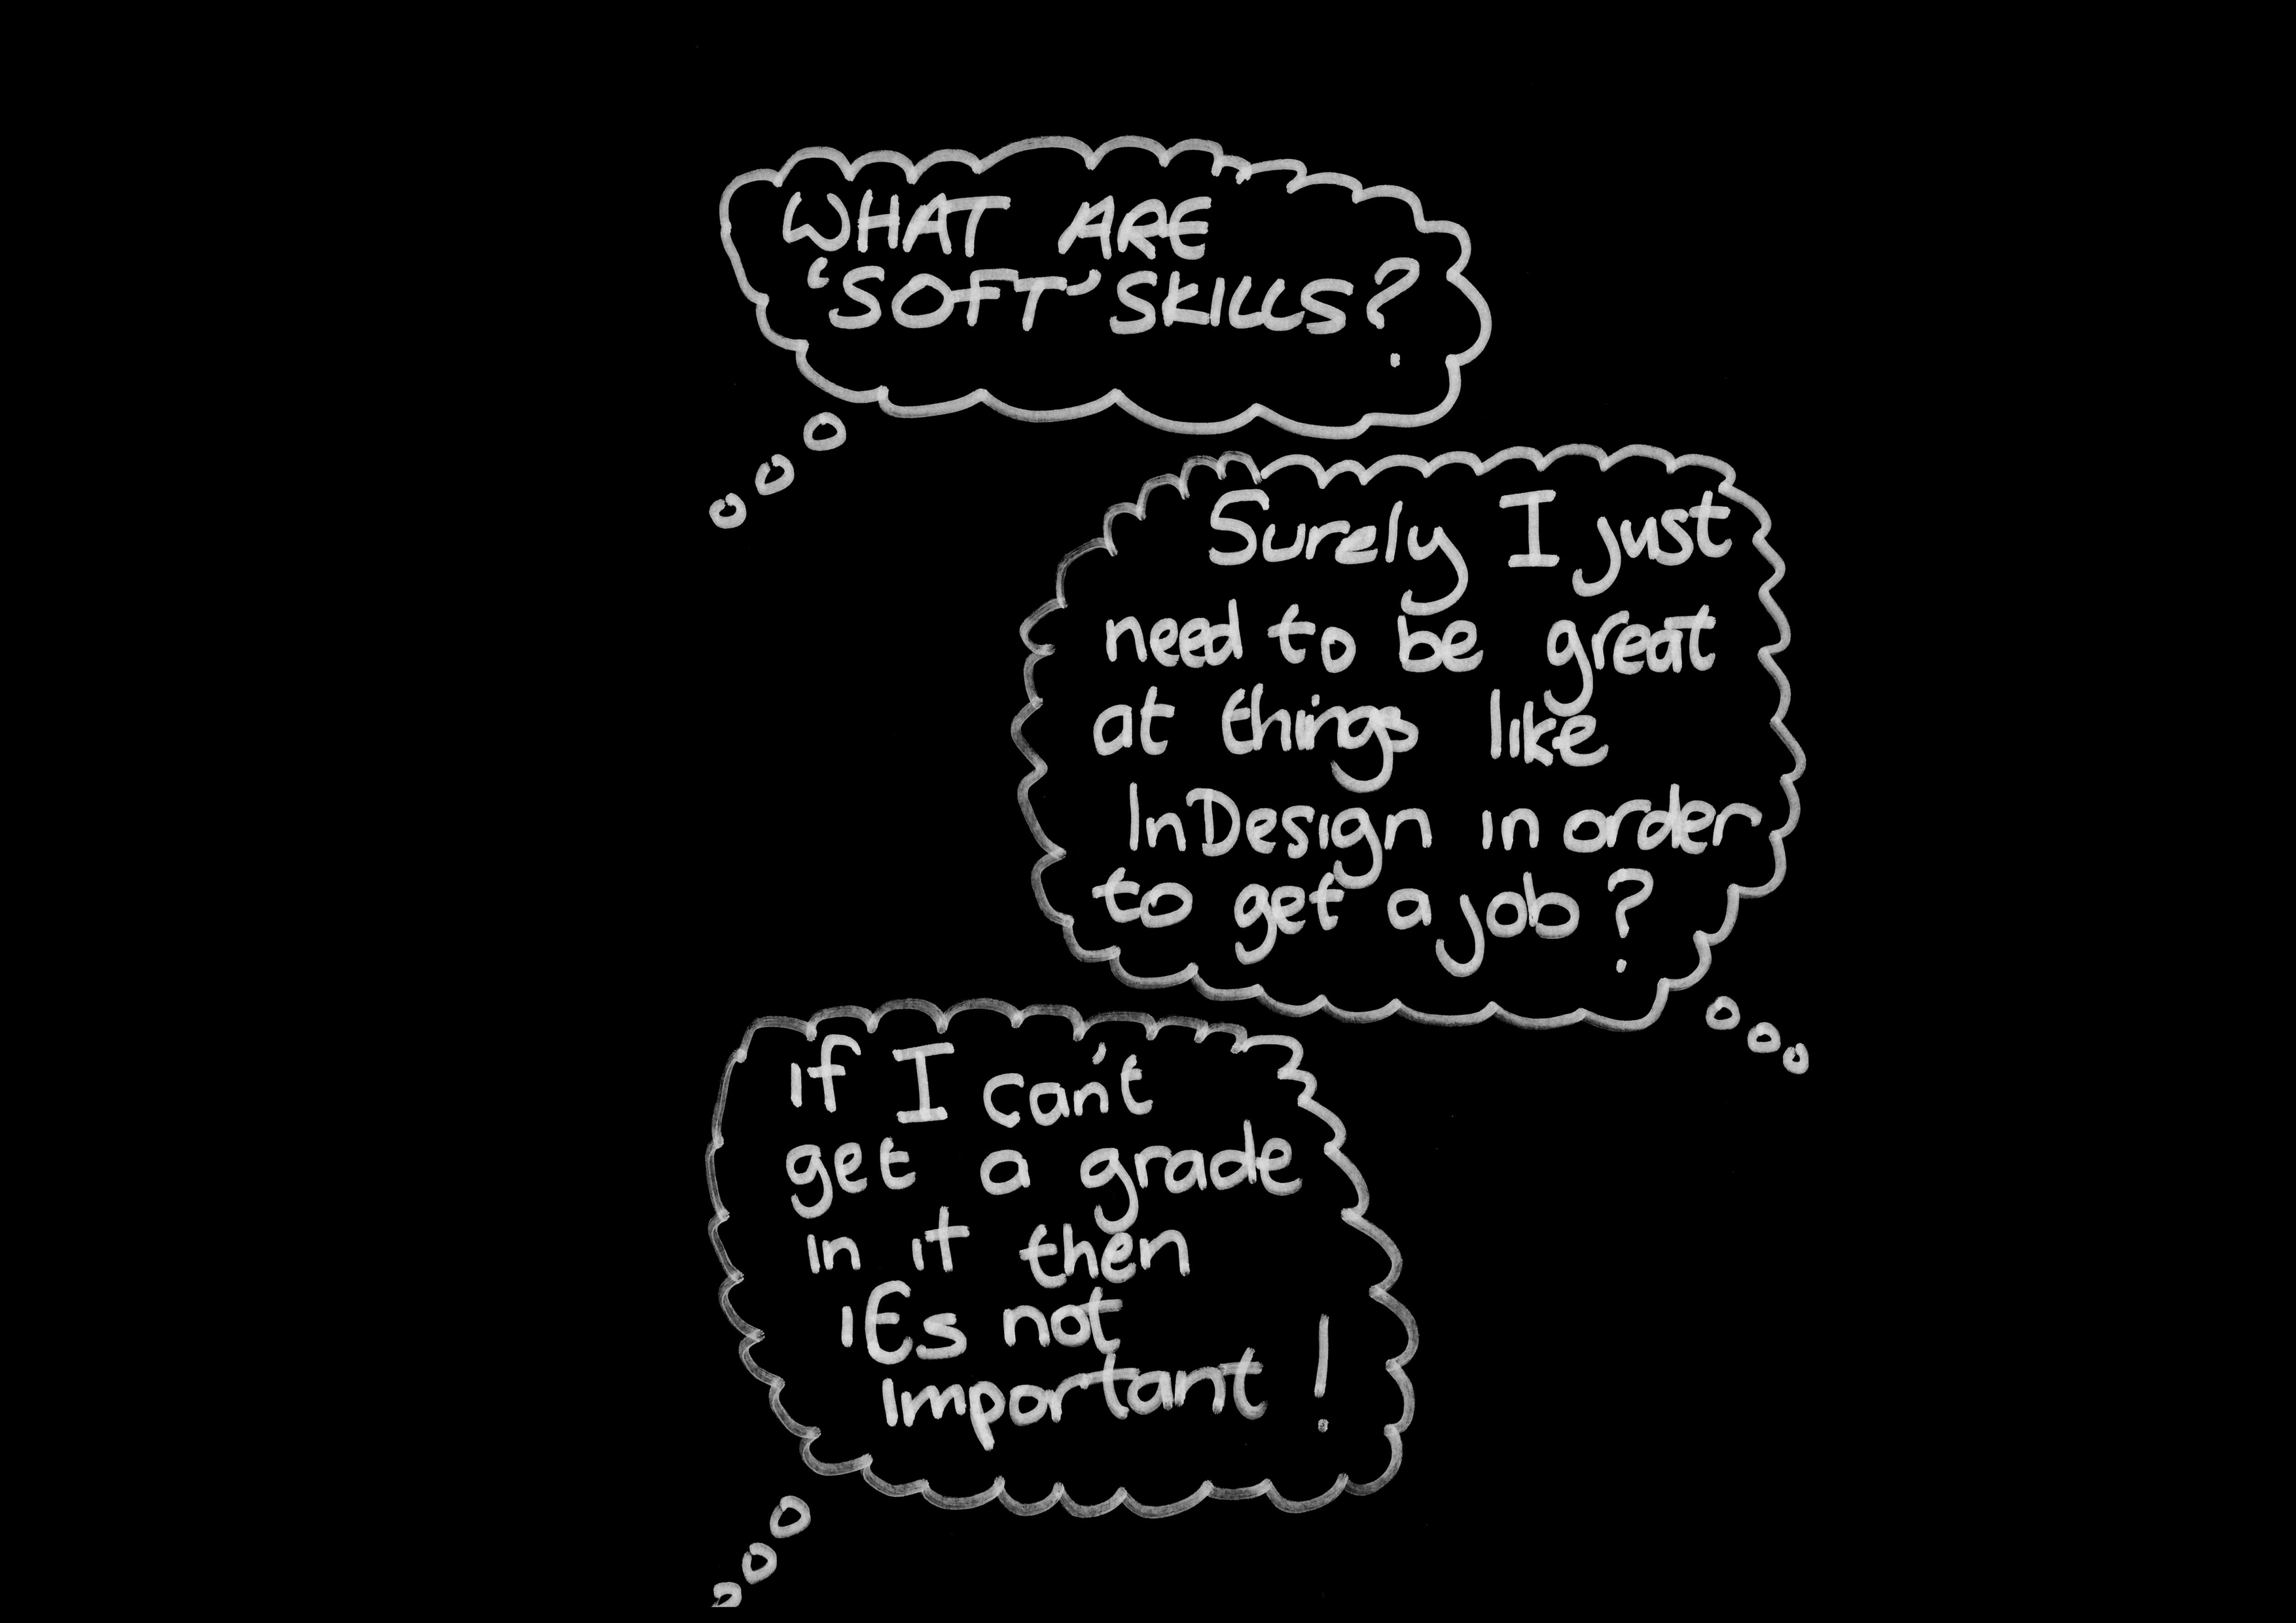 three speech bubbles containing comments of insecurity